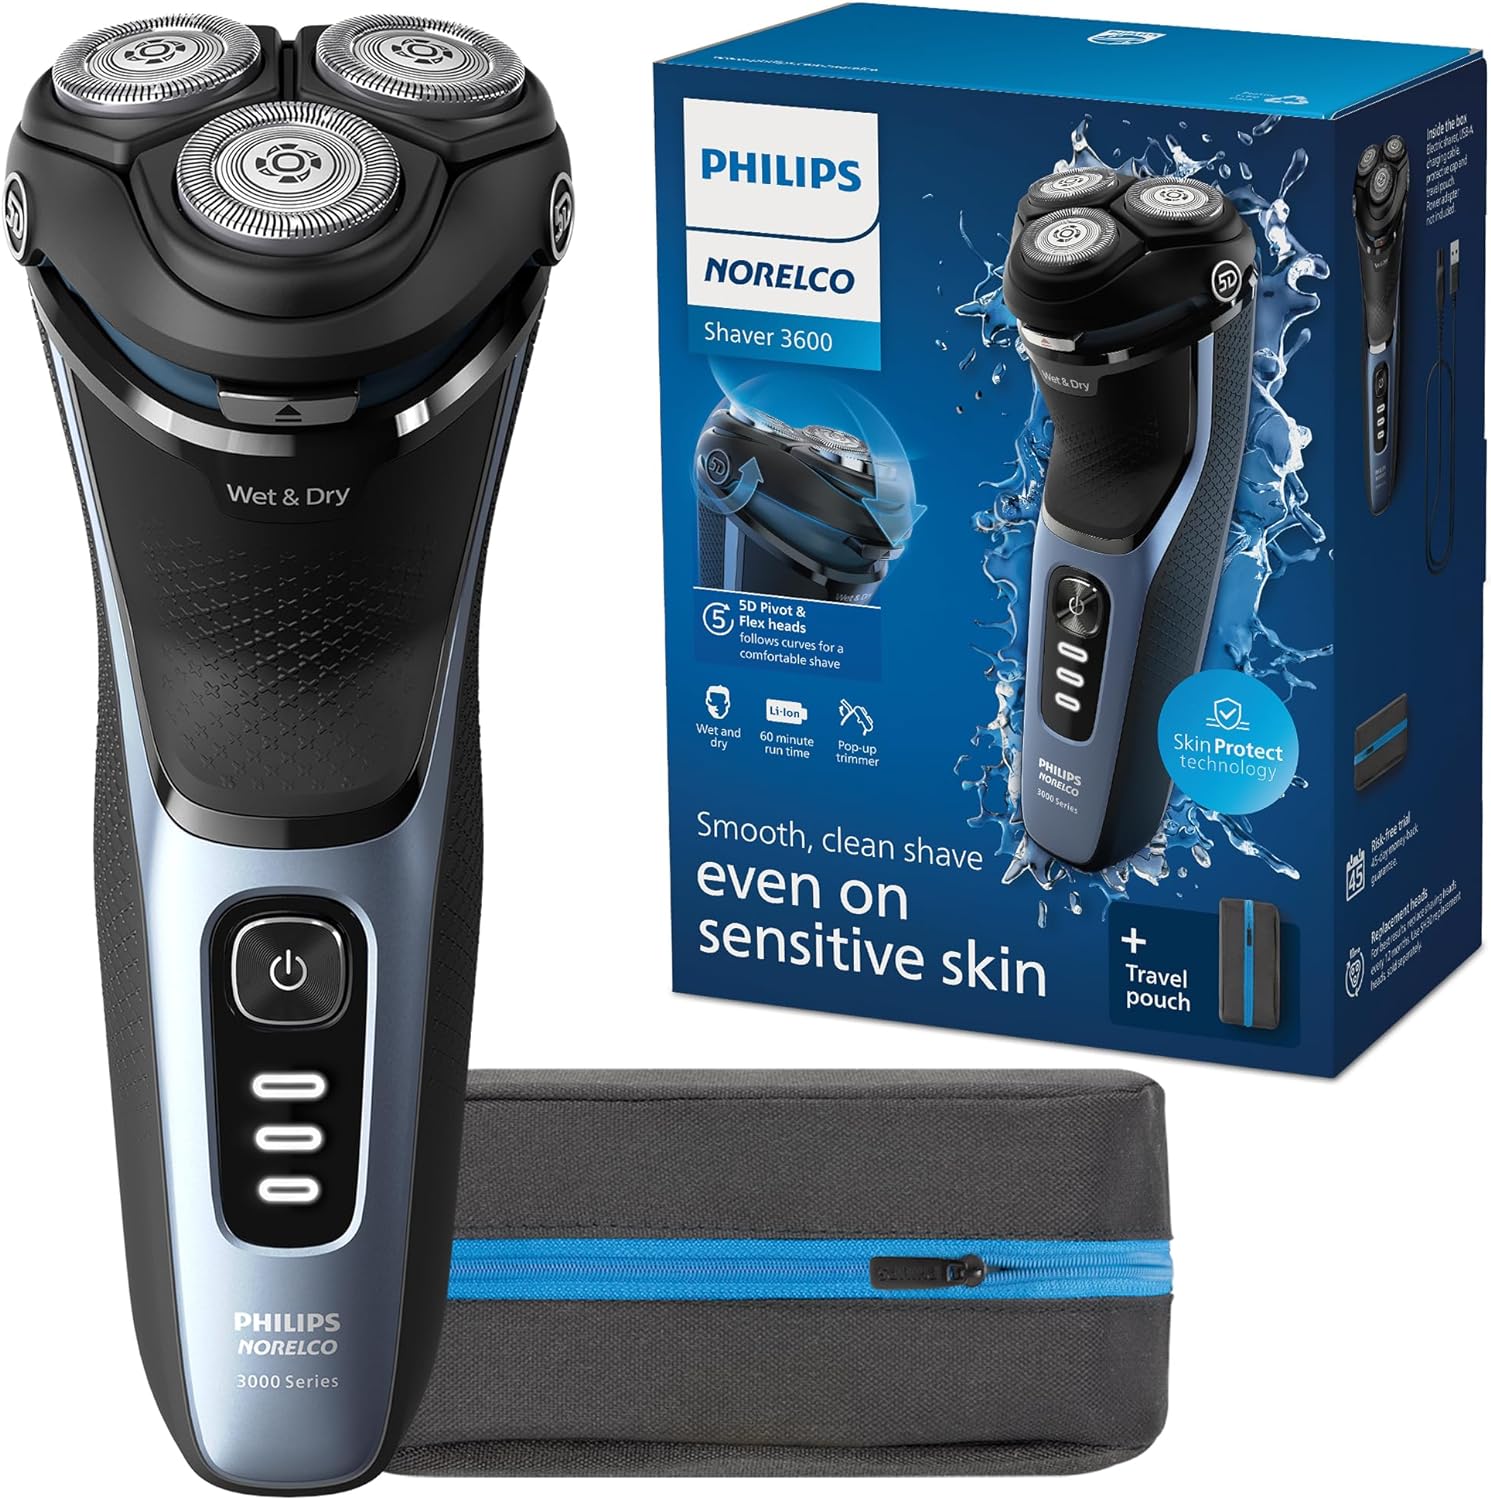 Philips Norelco Shaver 3600
